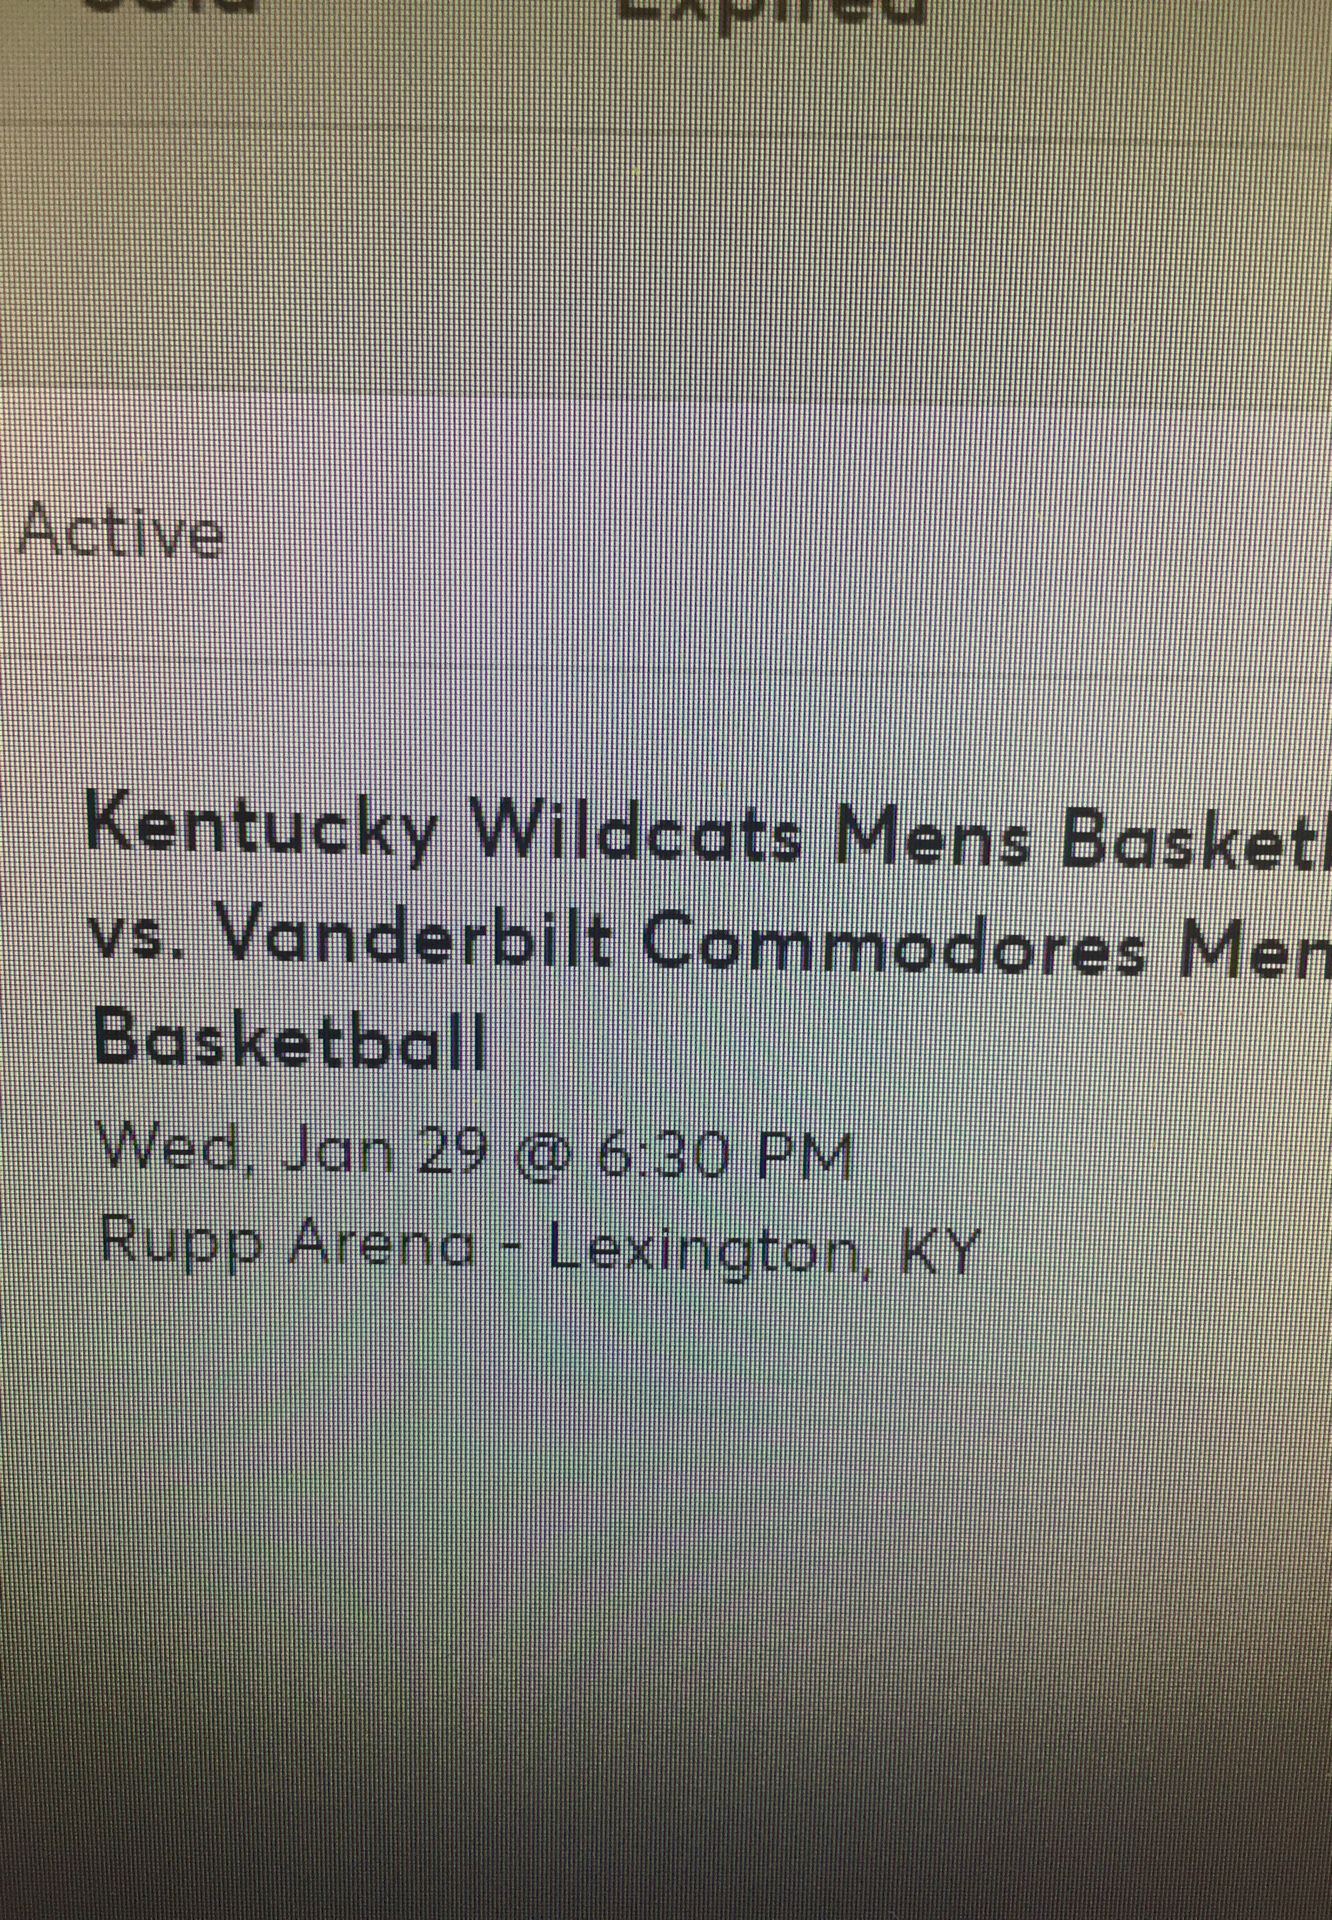 2 tickets to UK basketball game tonight. Section 219 row F.